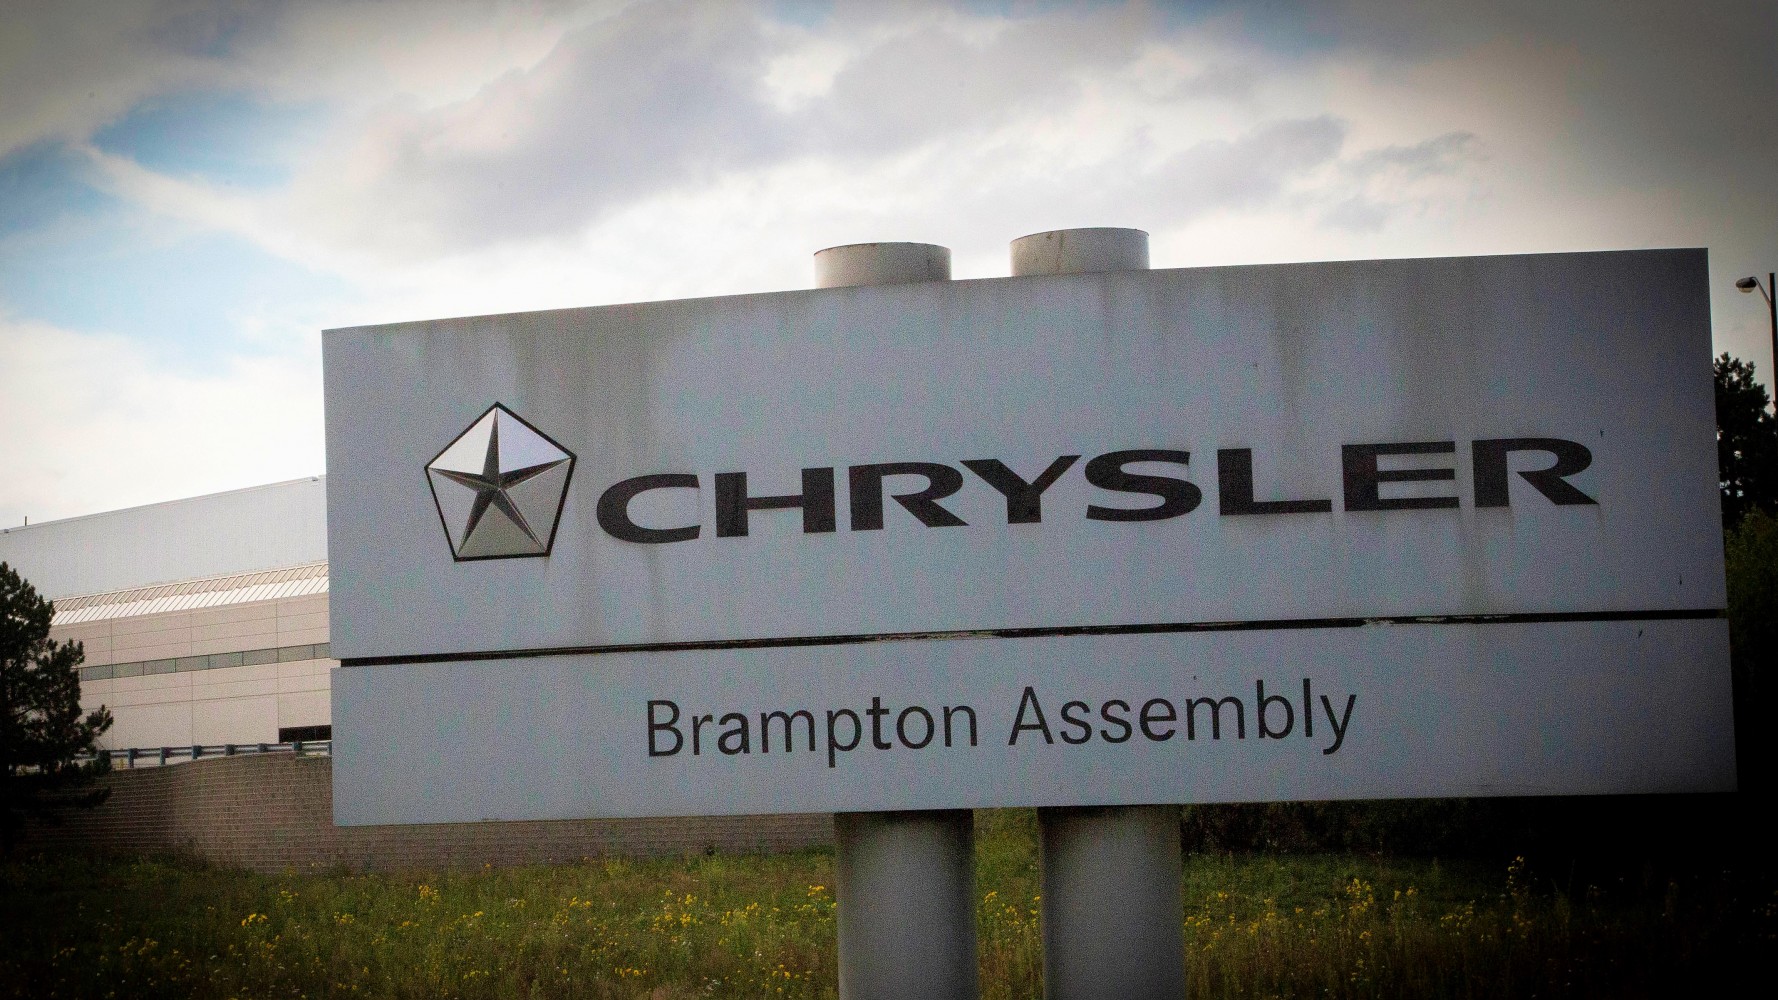 With a new owner Brampton’s Fiat Chrysler plant faces an uncertain future